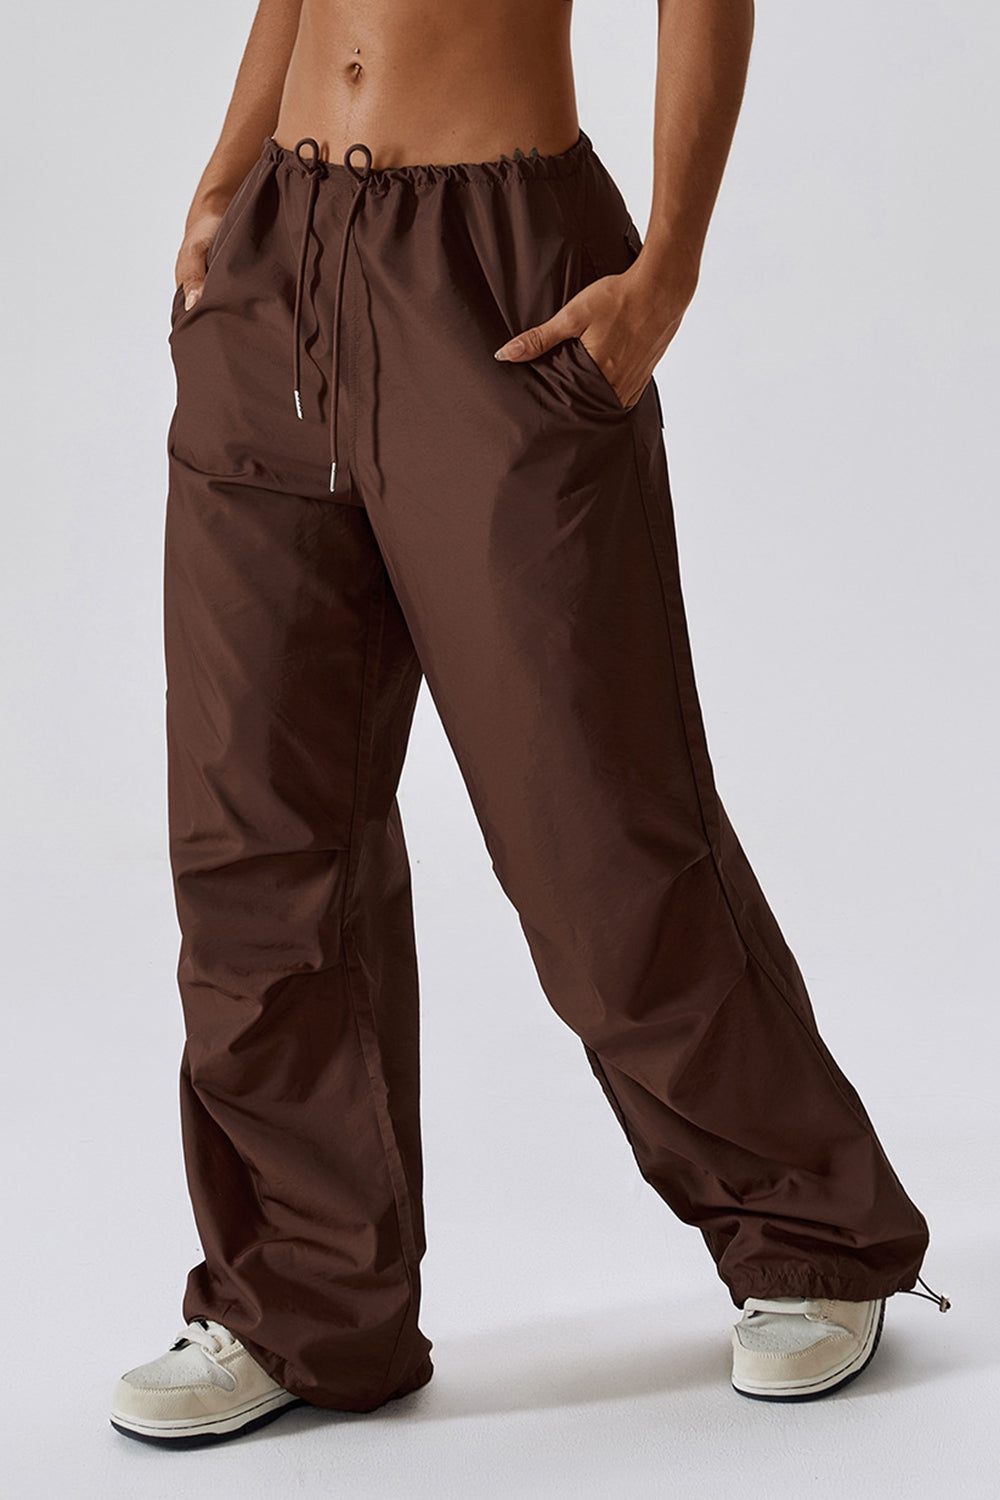 Long Loose Fit Pocketed Sports Pants